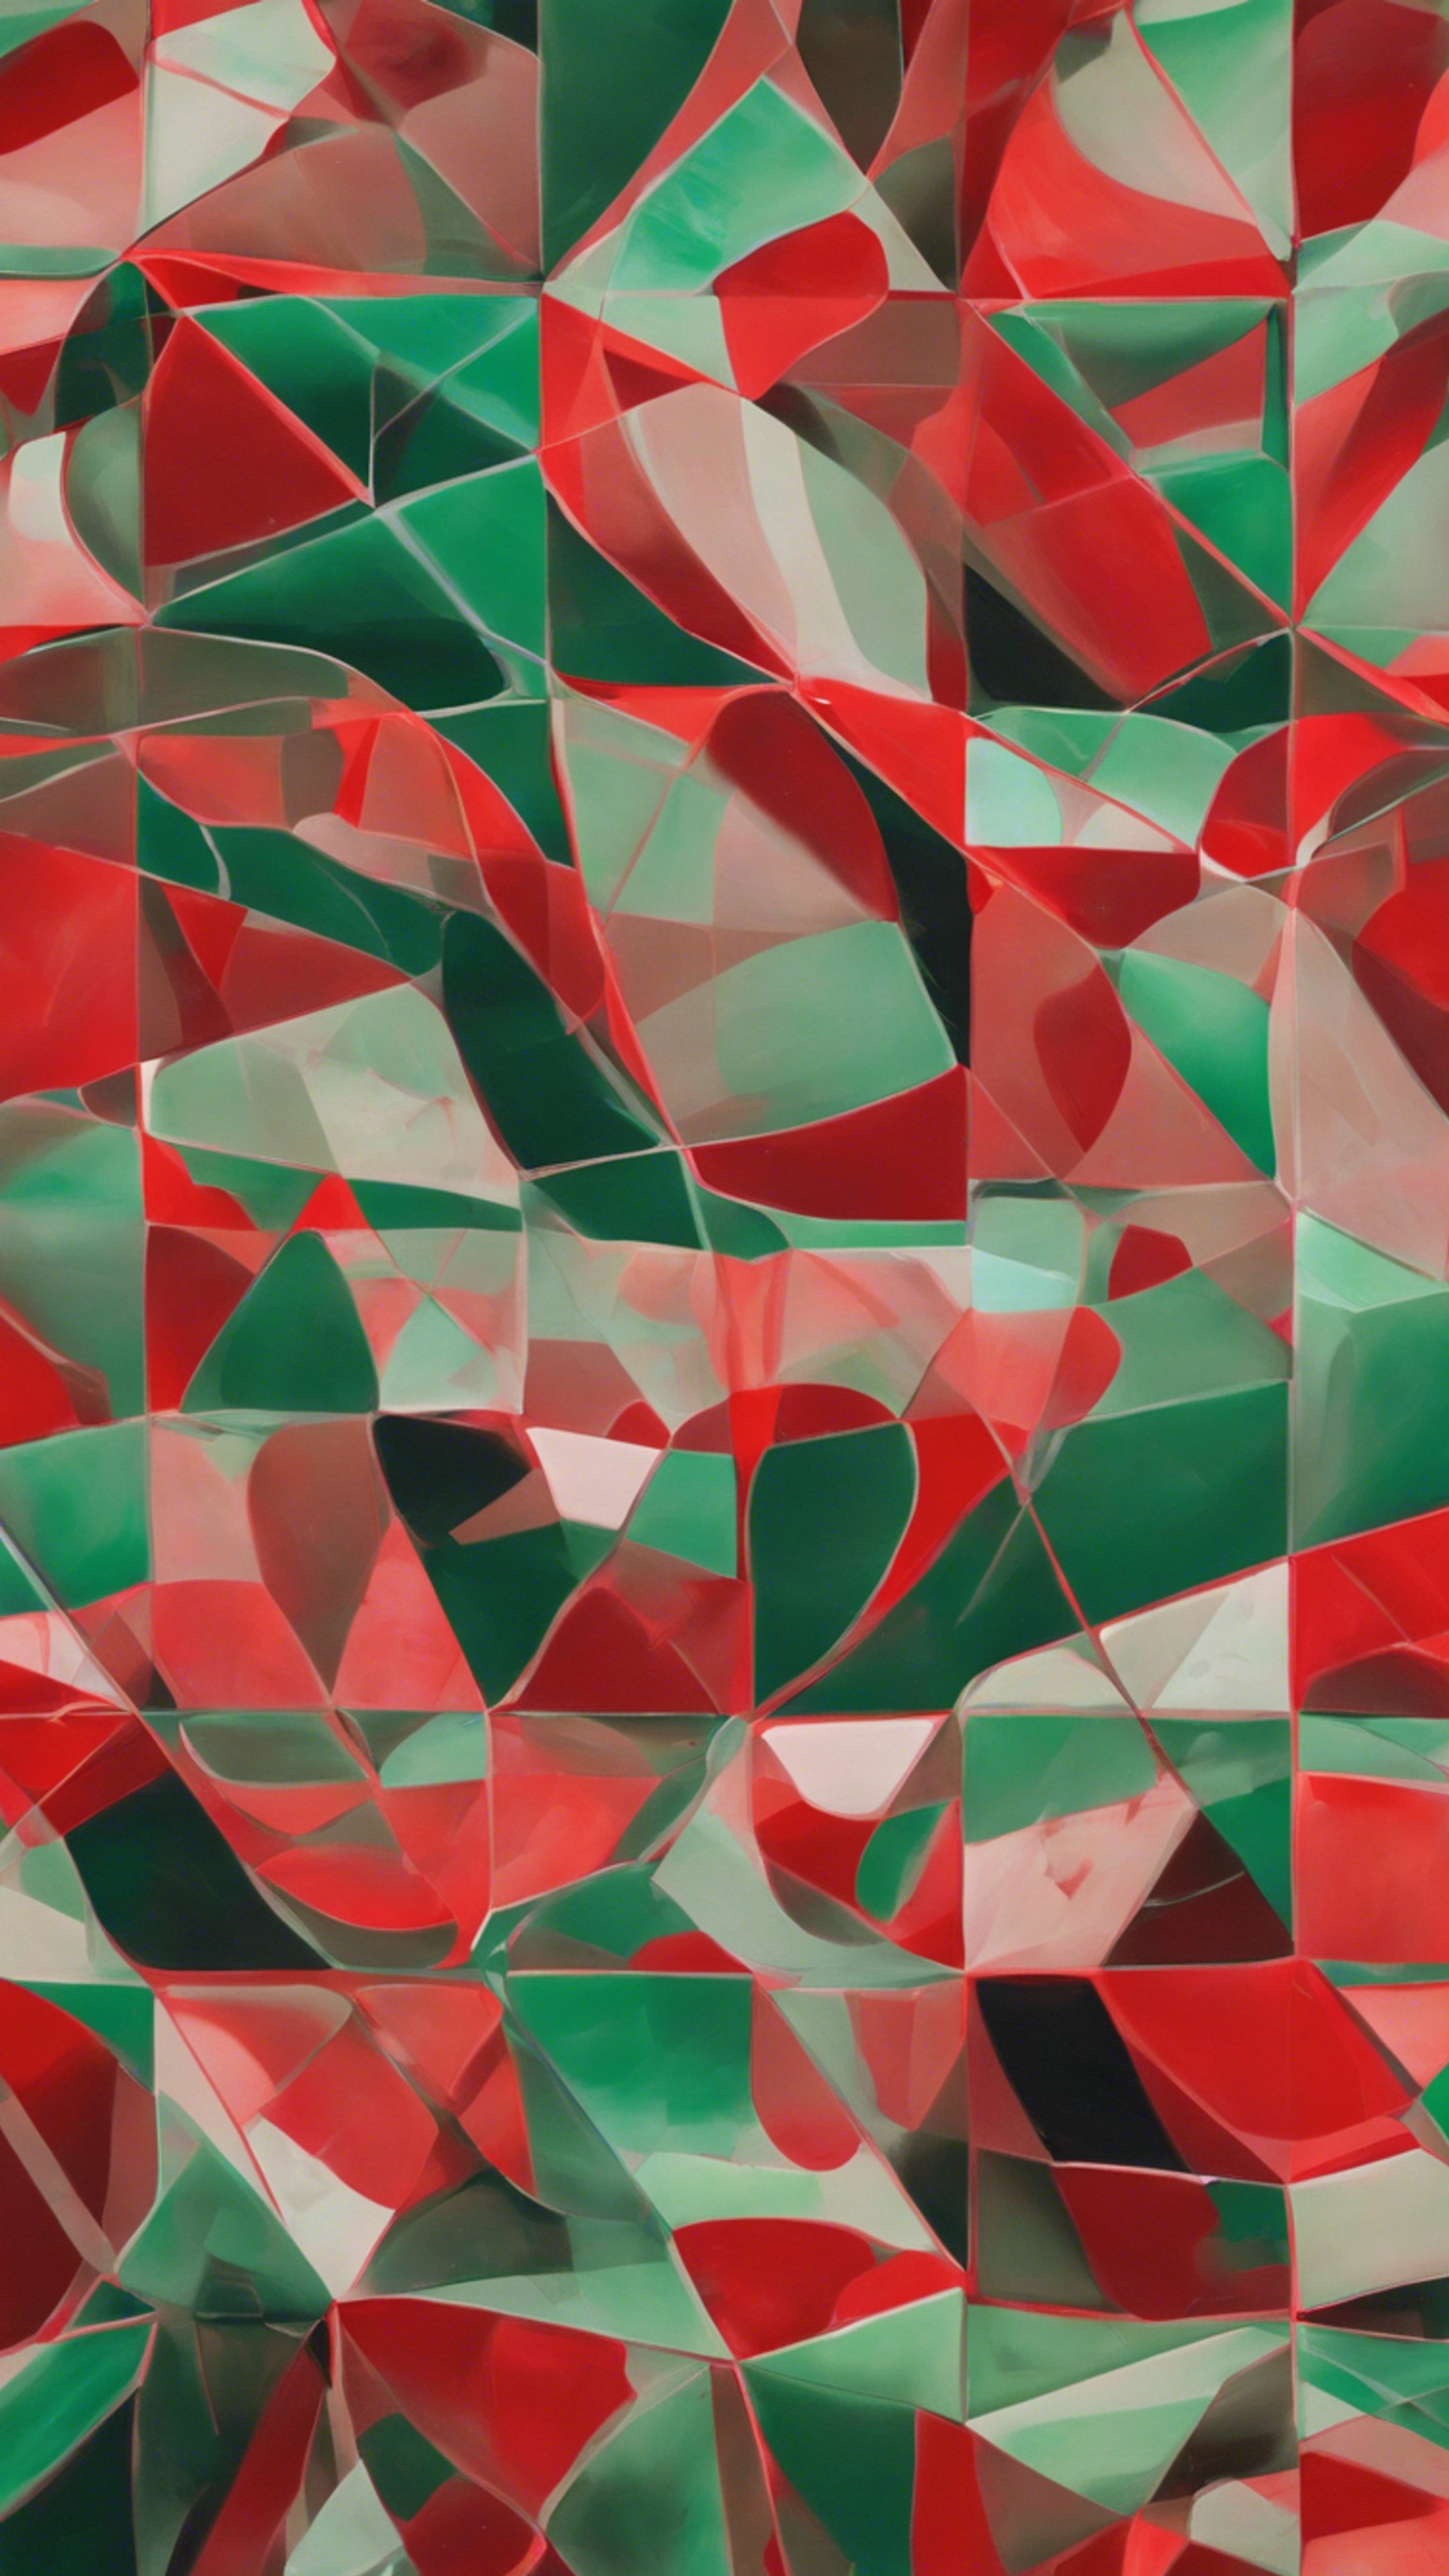 A modernist painting of red and green geometrical shapes, seamless in their connection טפט[cfa3acf637214e6a9239]